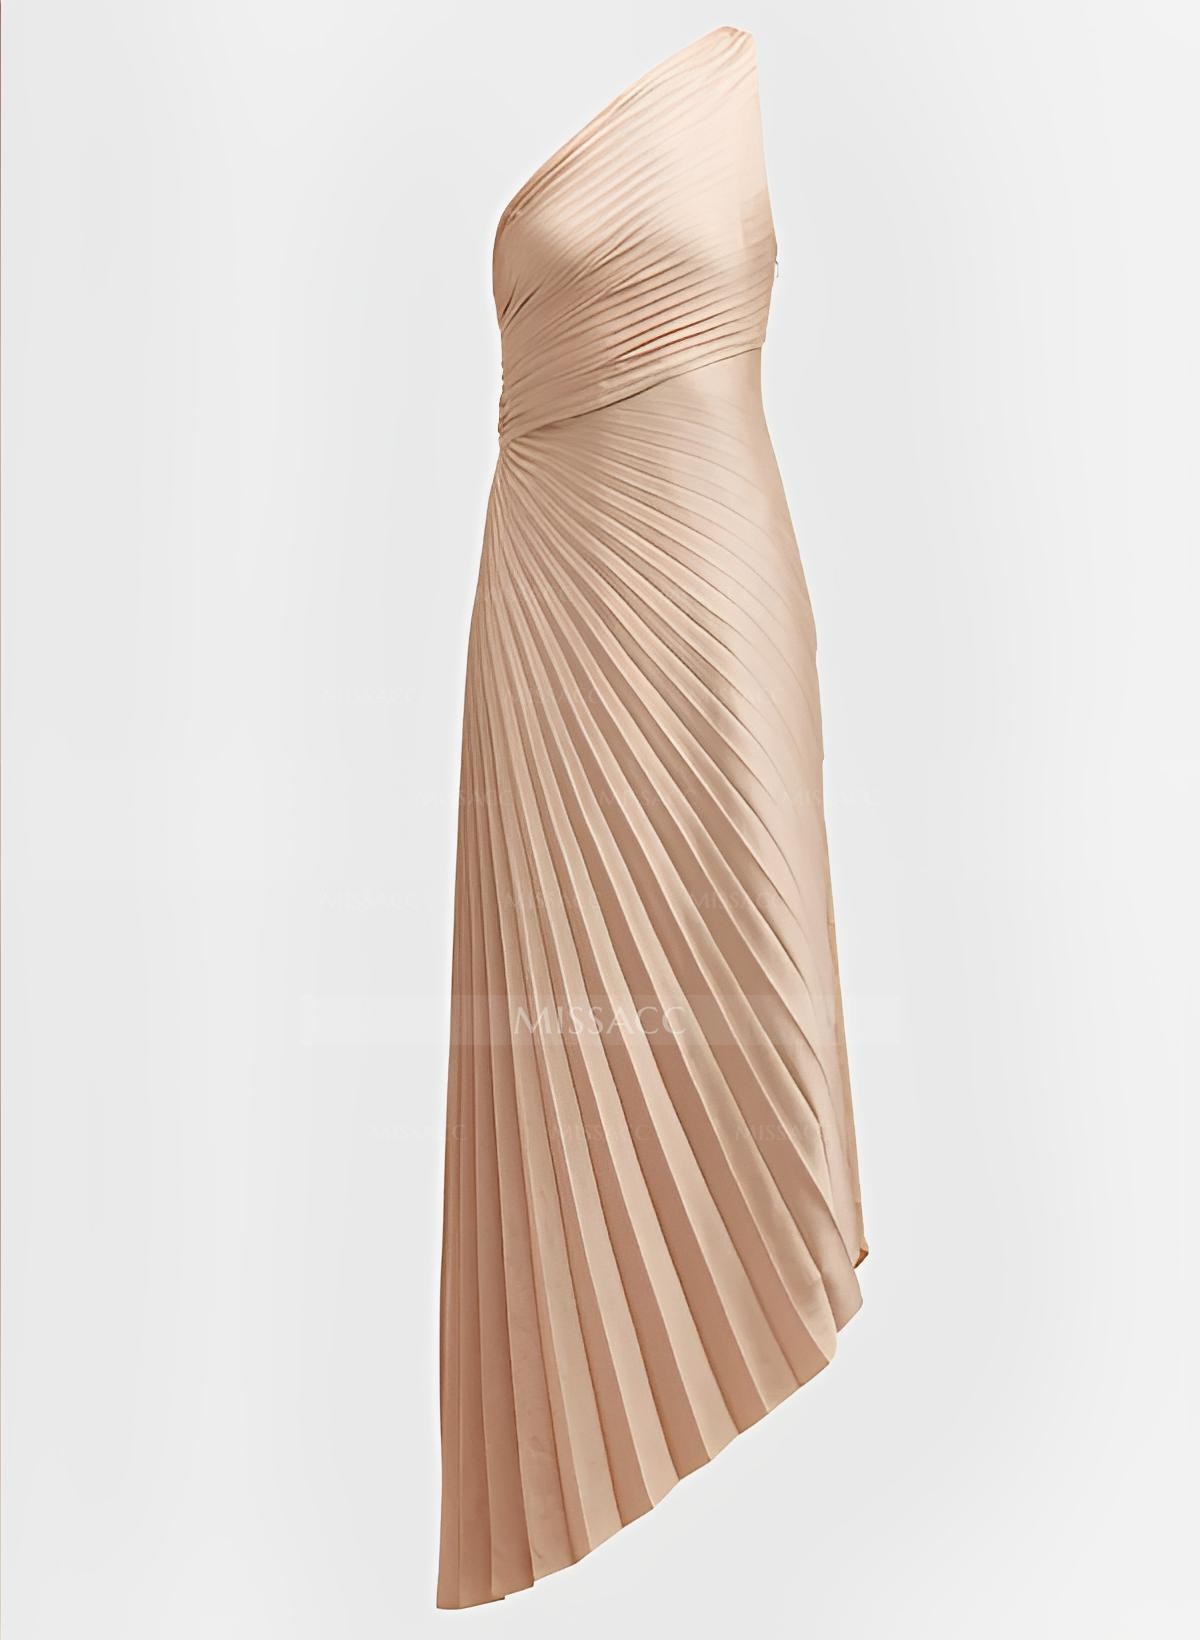 One-Shoulder Sleeveless Asymmetrical Cocktail Dresses With Pleated